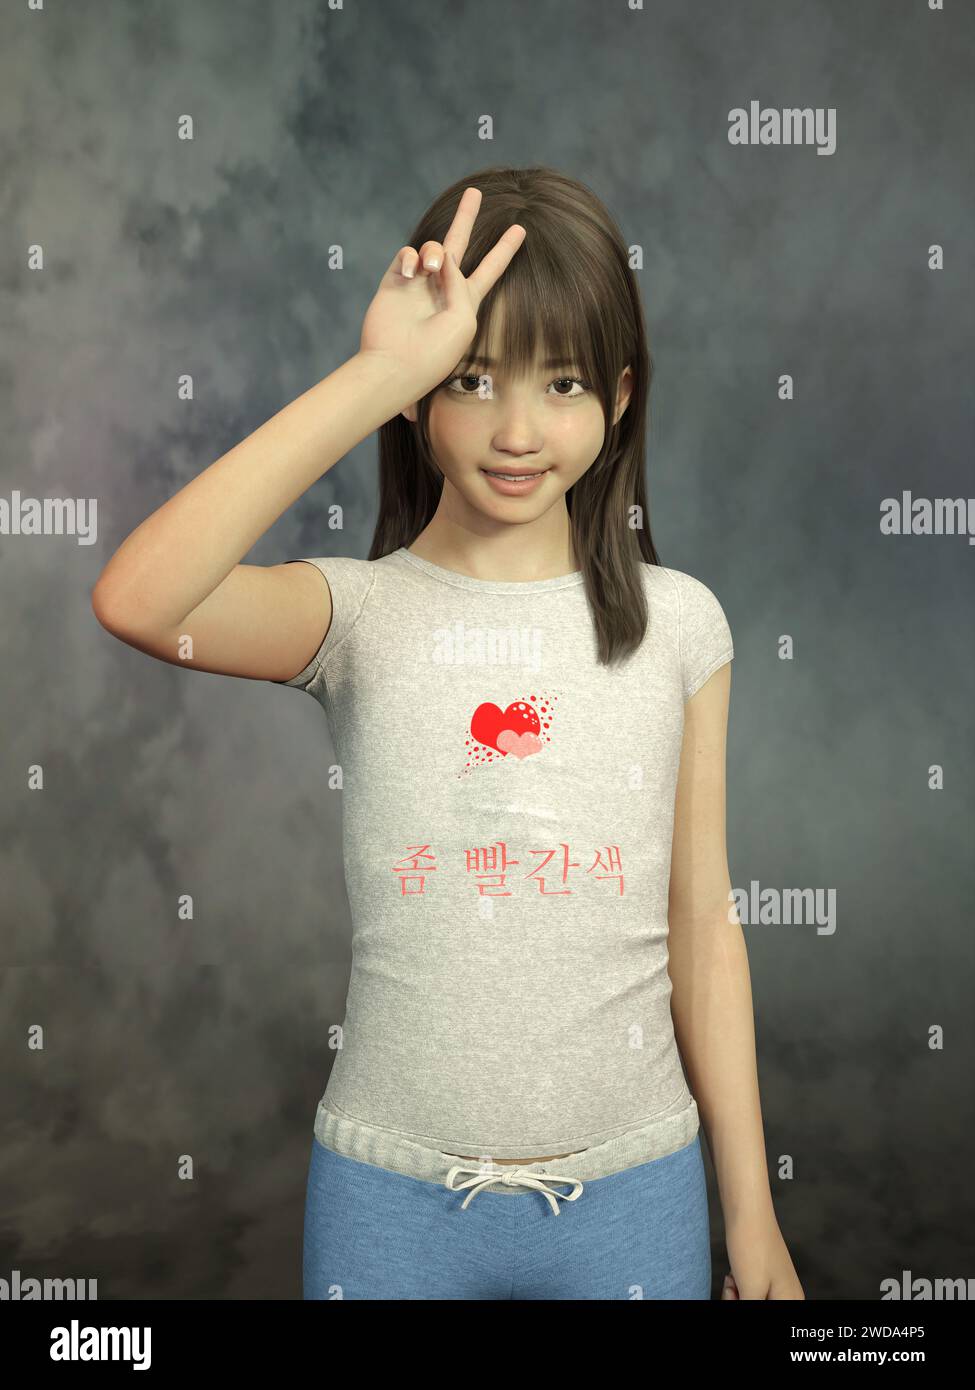 Photo realistic 3D rendered portrait of fictional young asian girl, t-shirt reads: a little red; made without AI, no model release required. Stock Photo